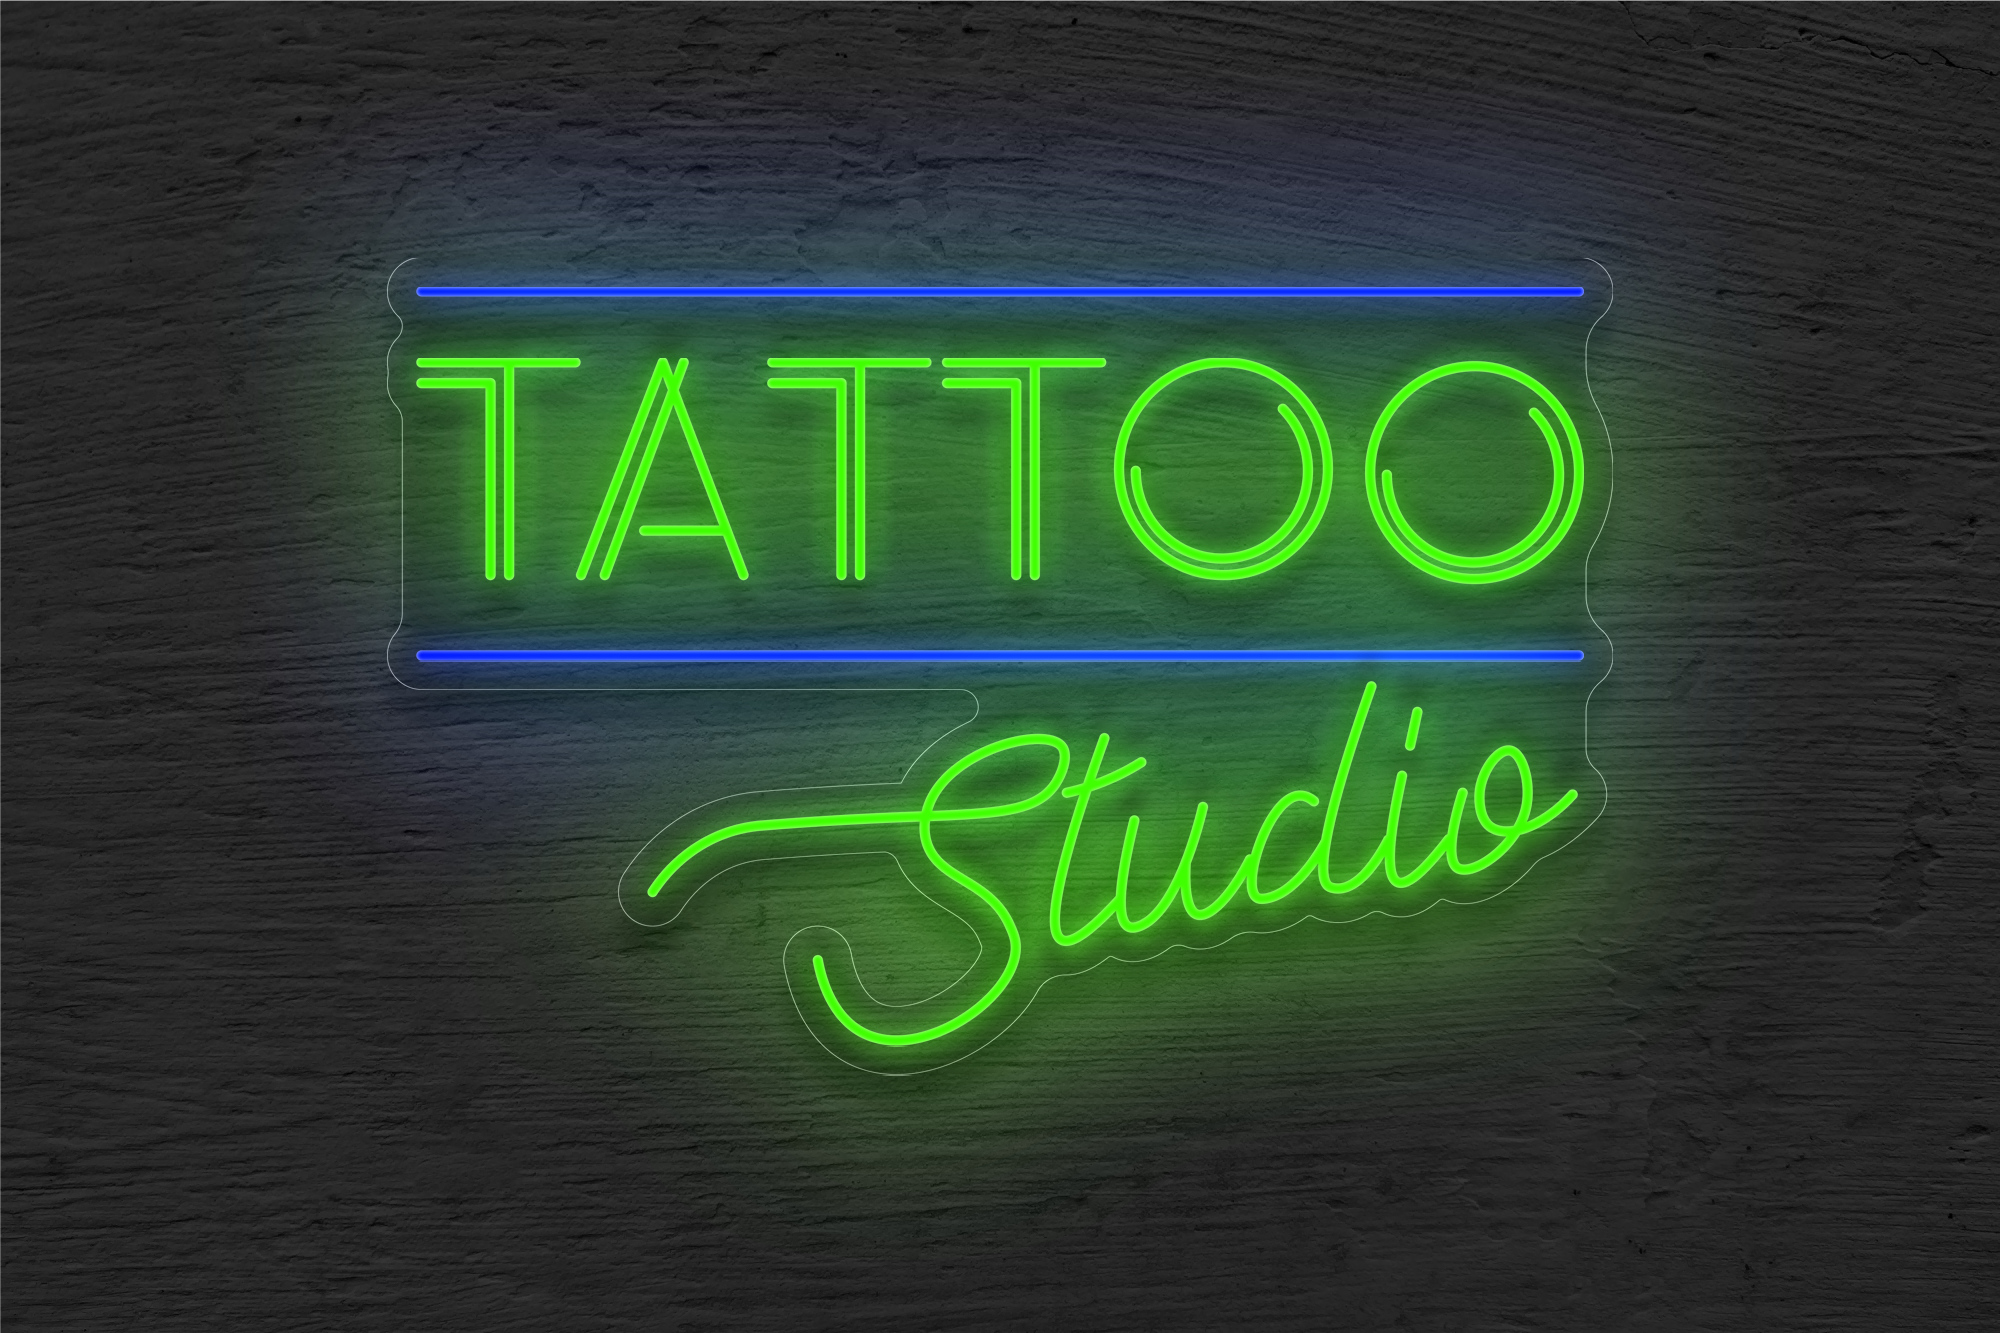 Tattoo studio logo in a neon style. Neon sign, emblem, a symbol of man's  heart is